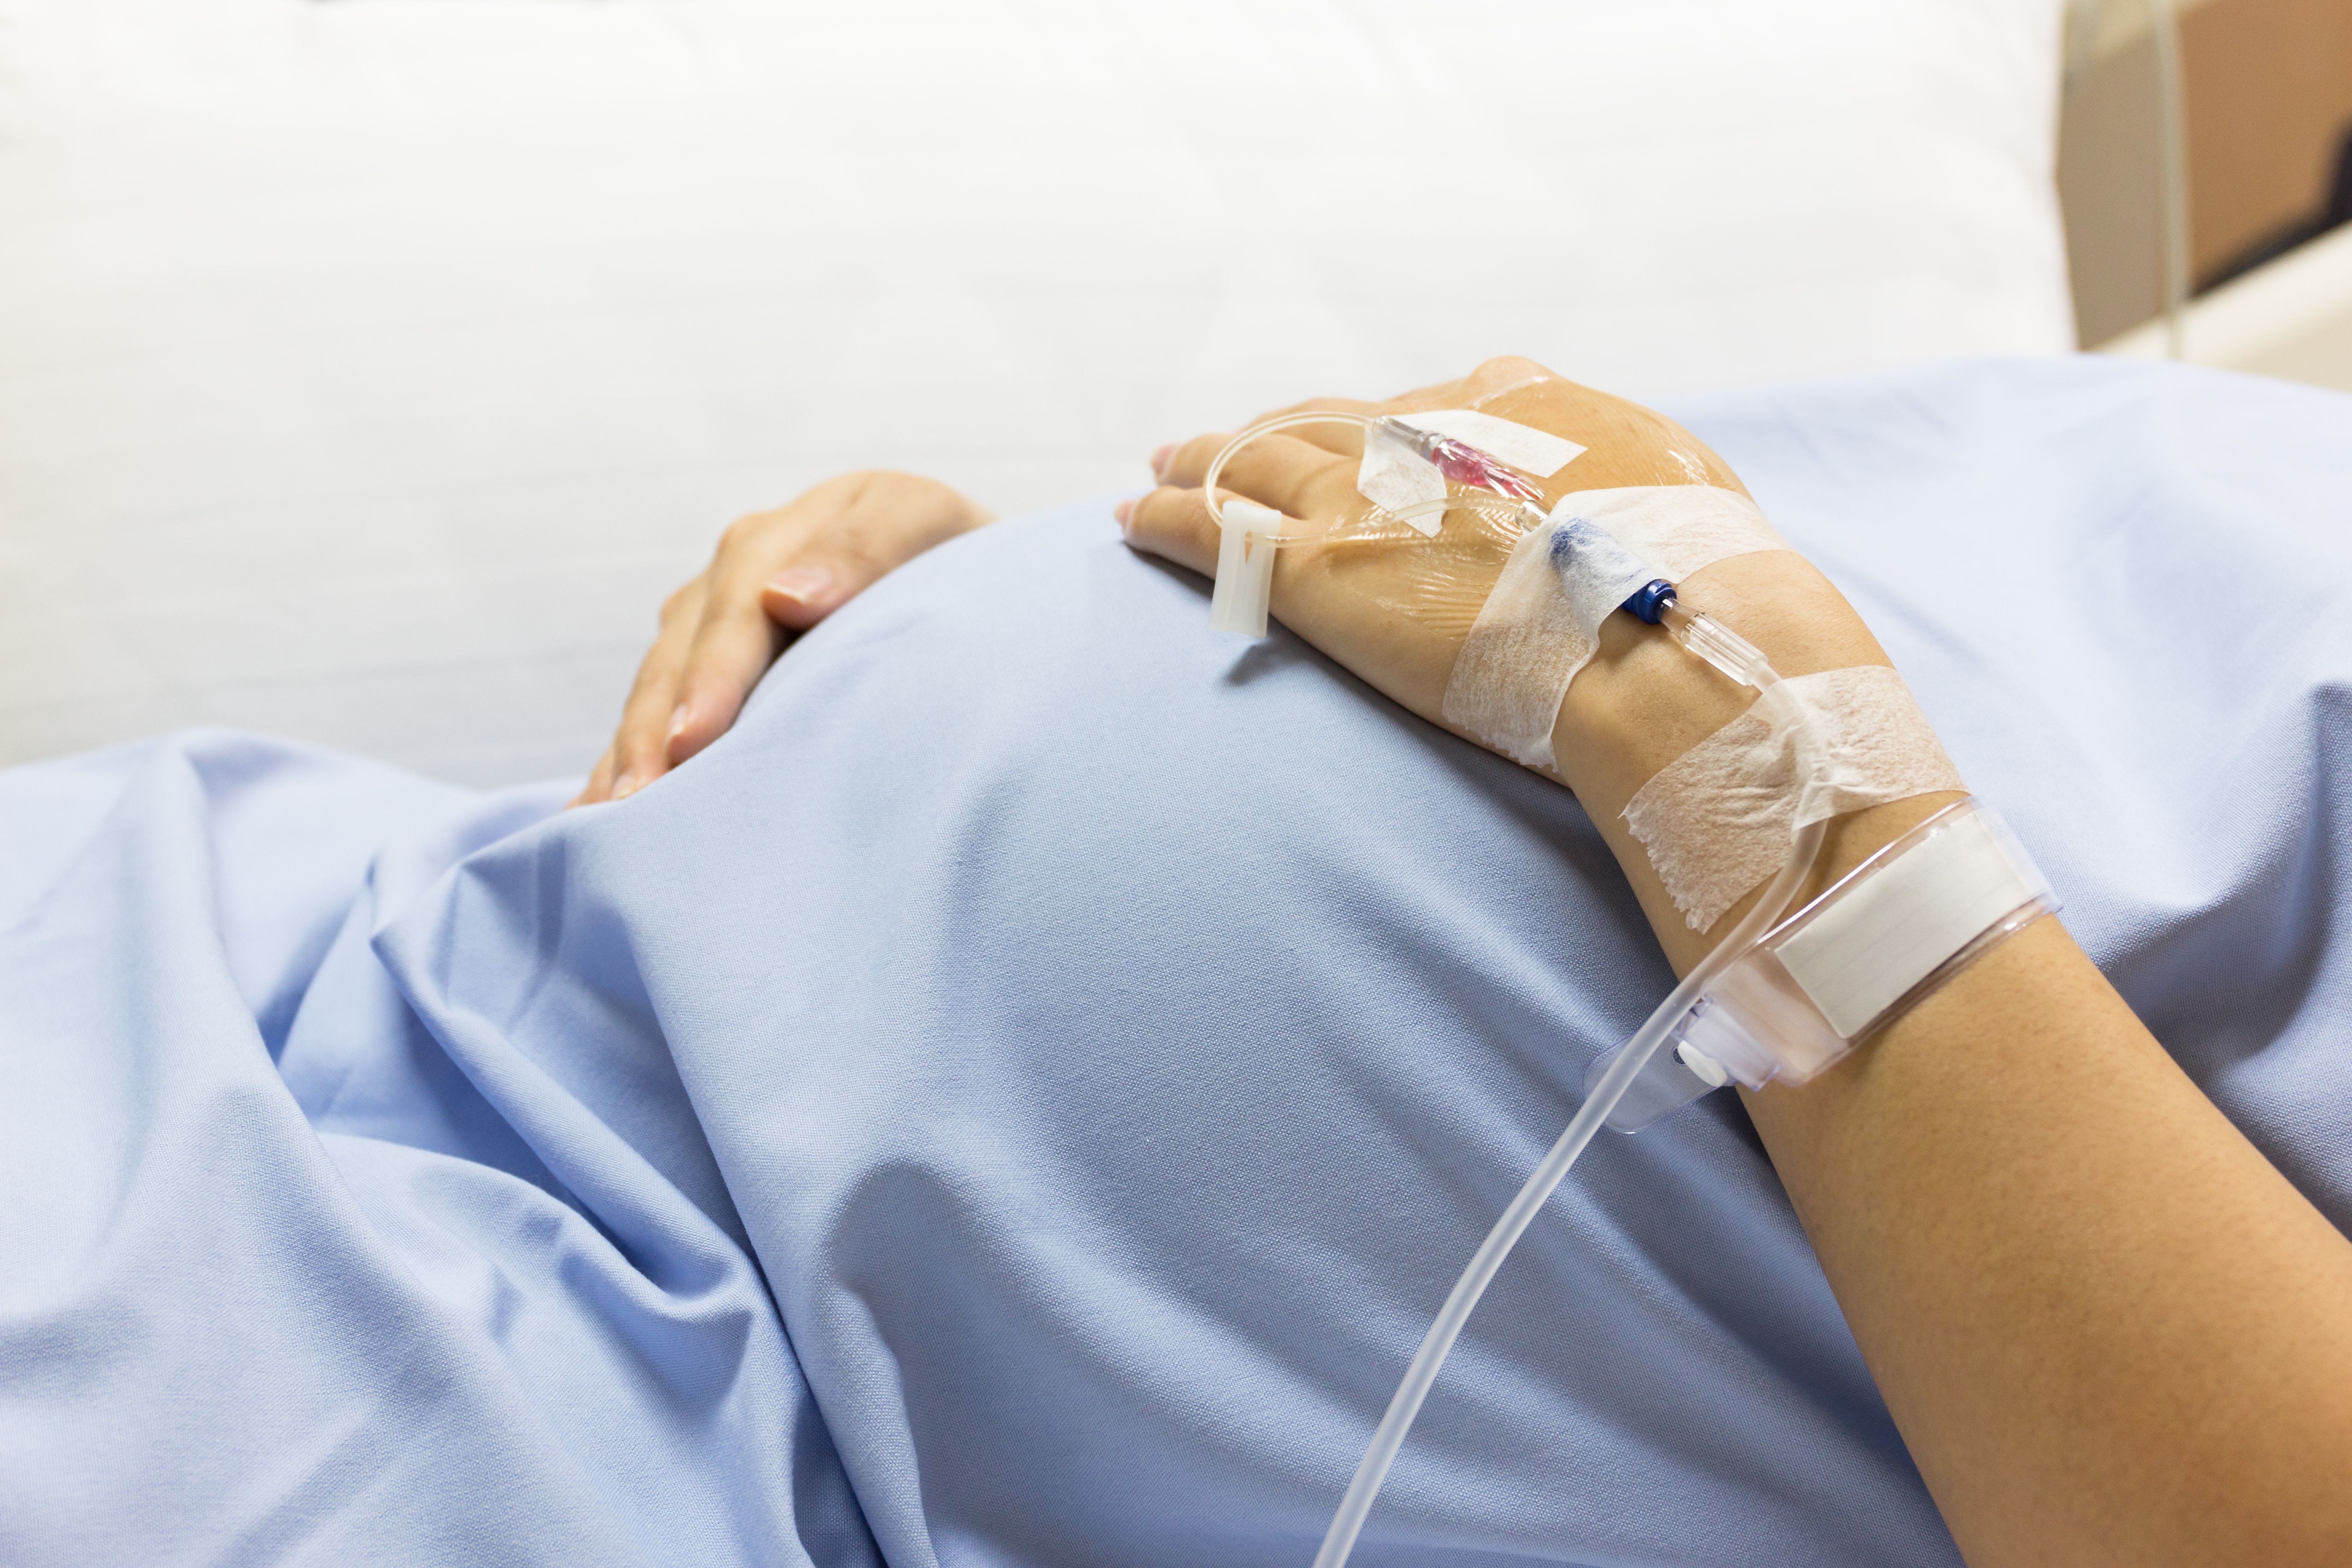 Iron Infusion: Benefits, Side Effects & What To Expect